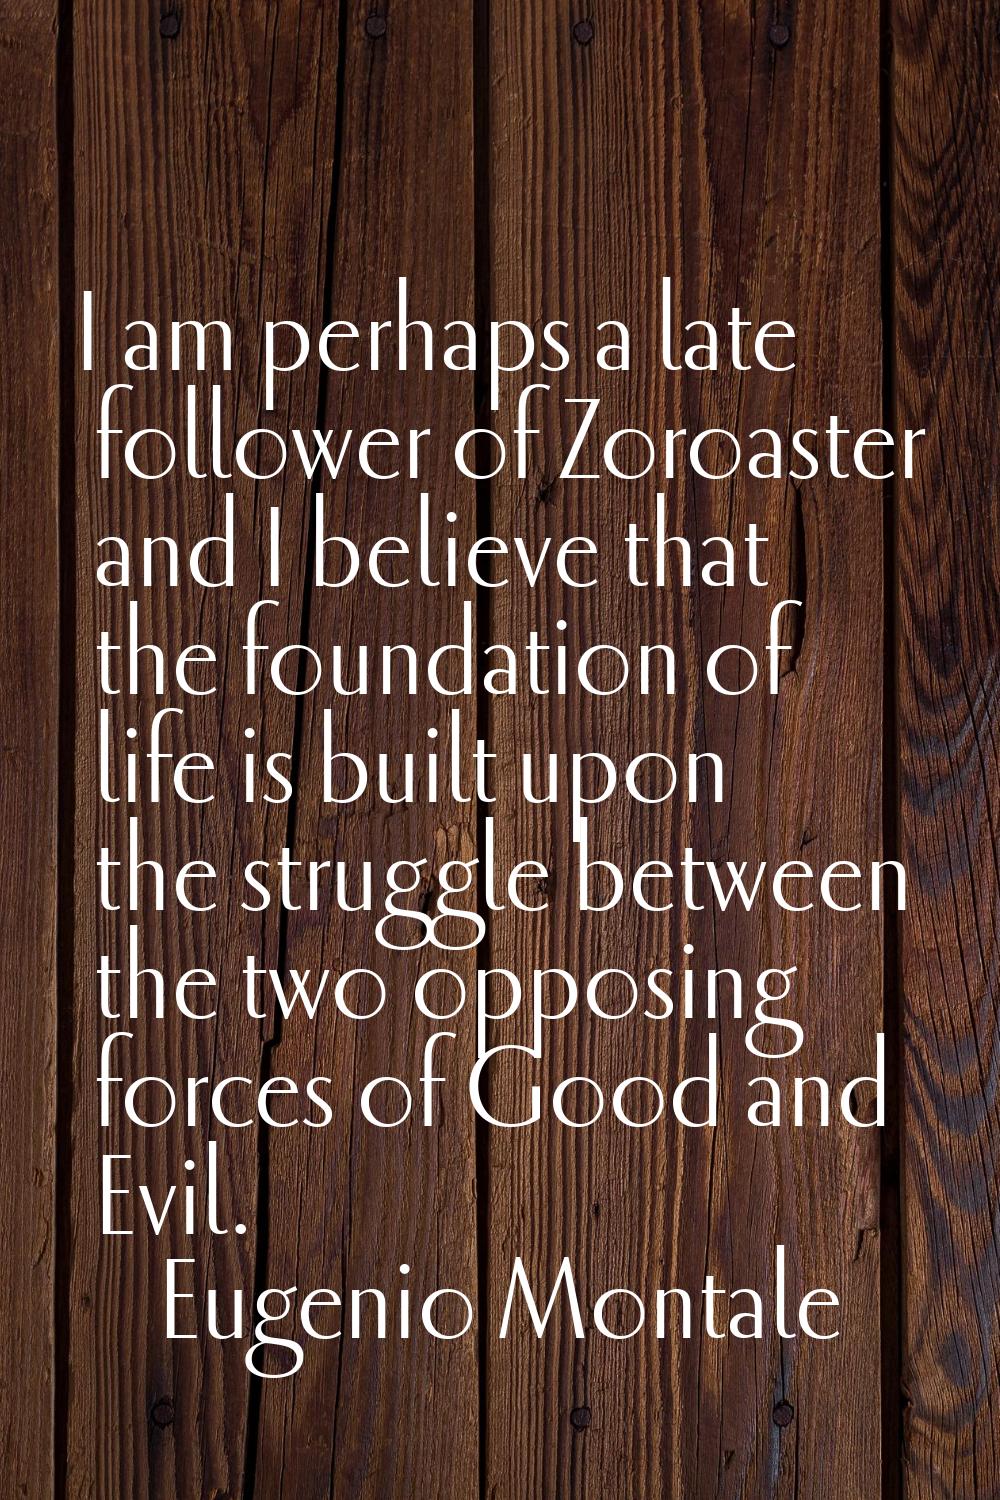 I am perhaps a late follower of Zoroaster and I believe that the foundation of life is built upon t